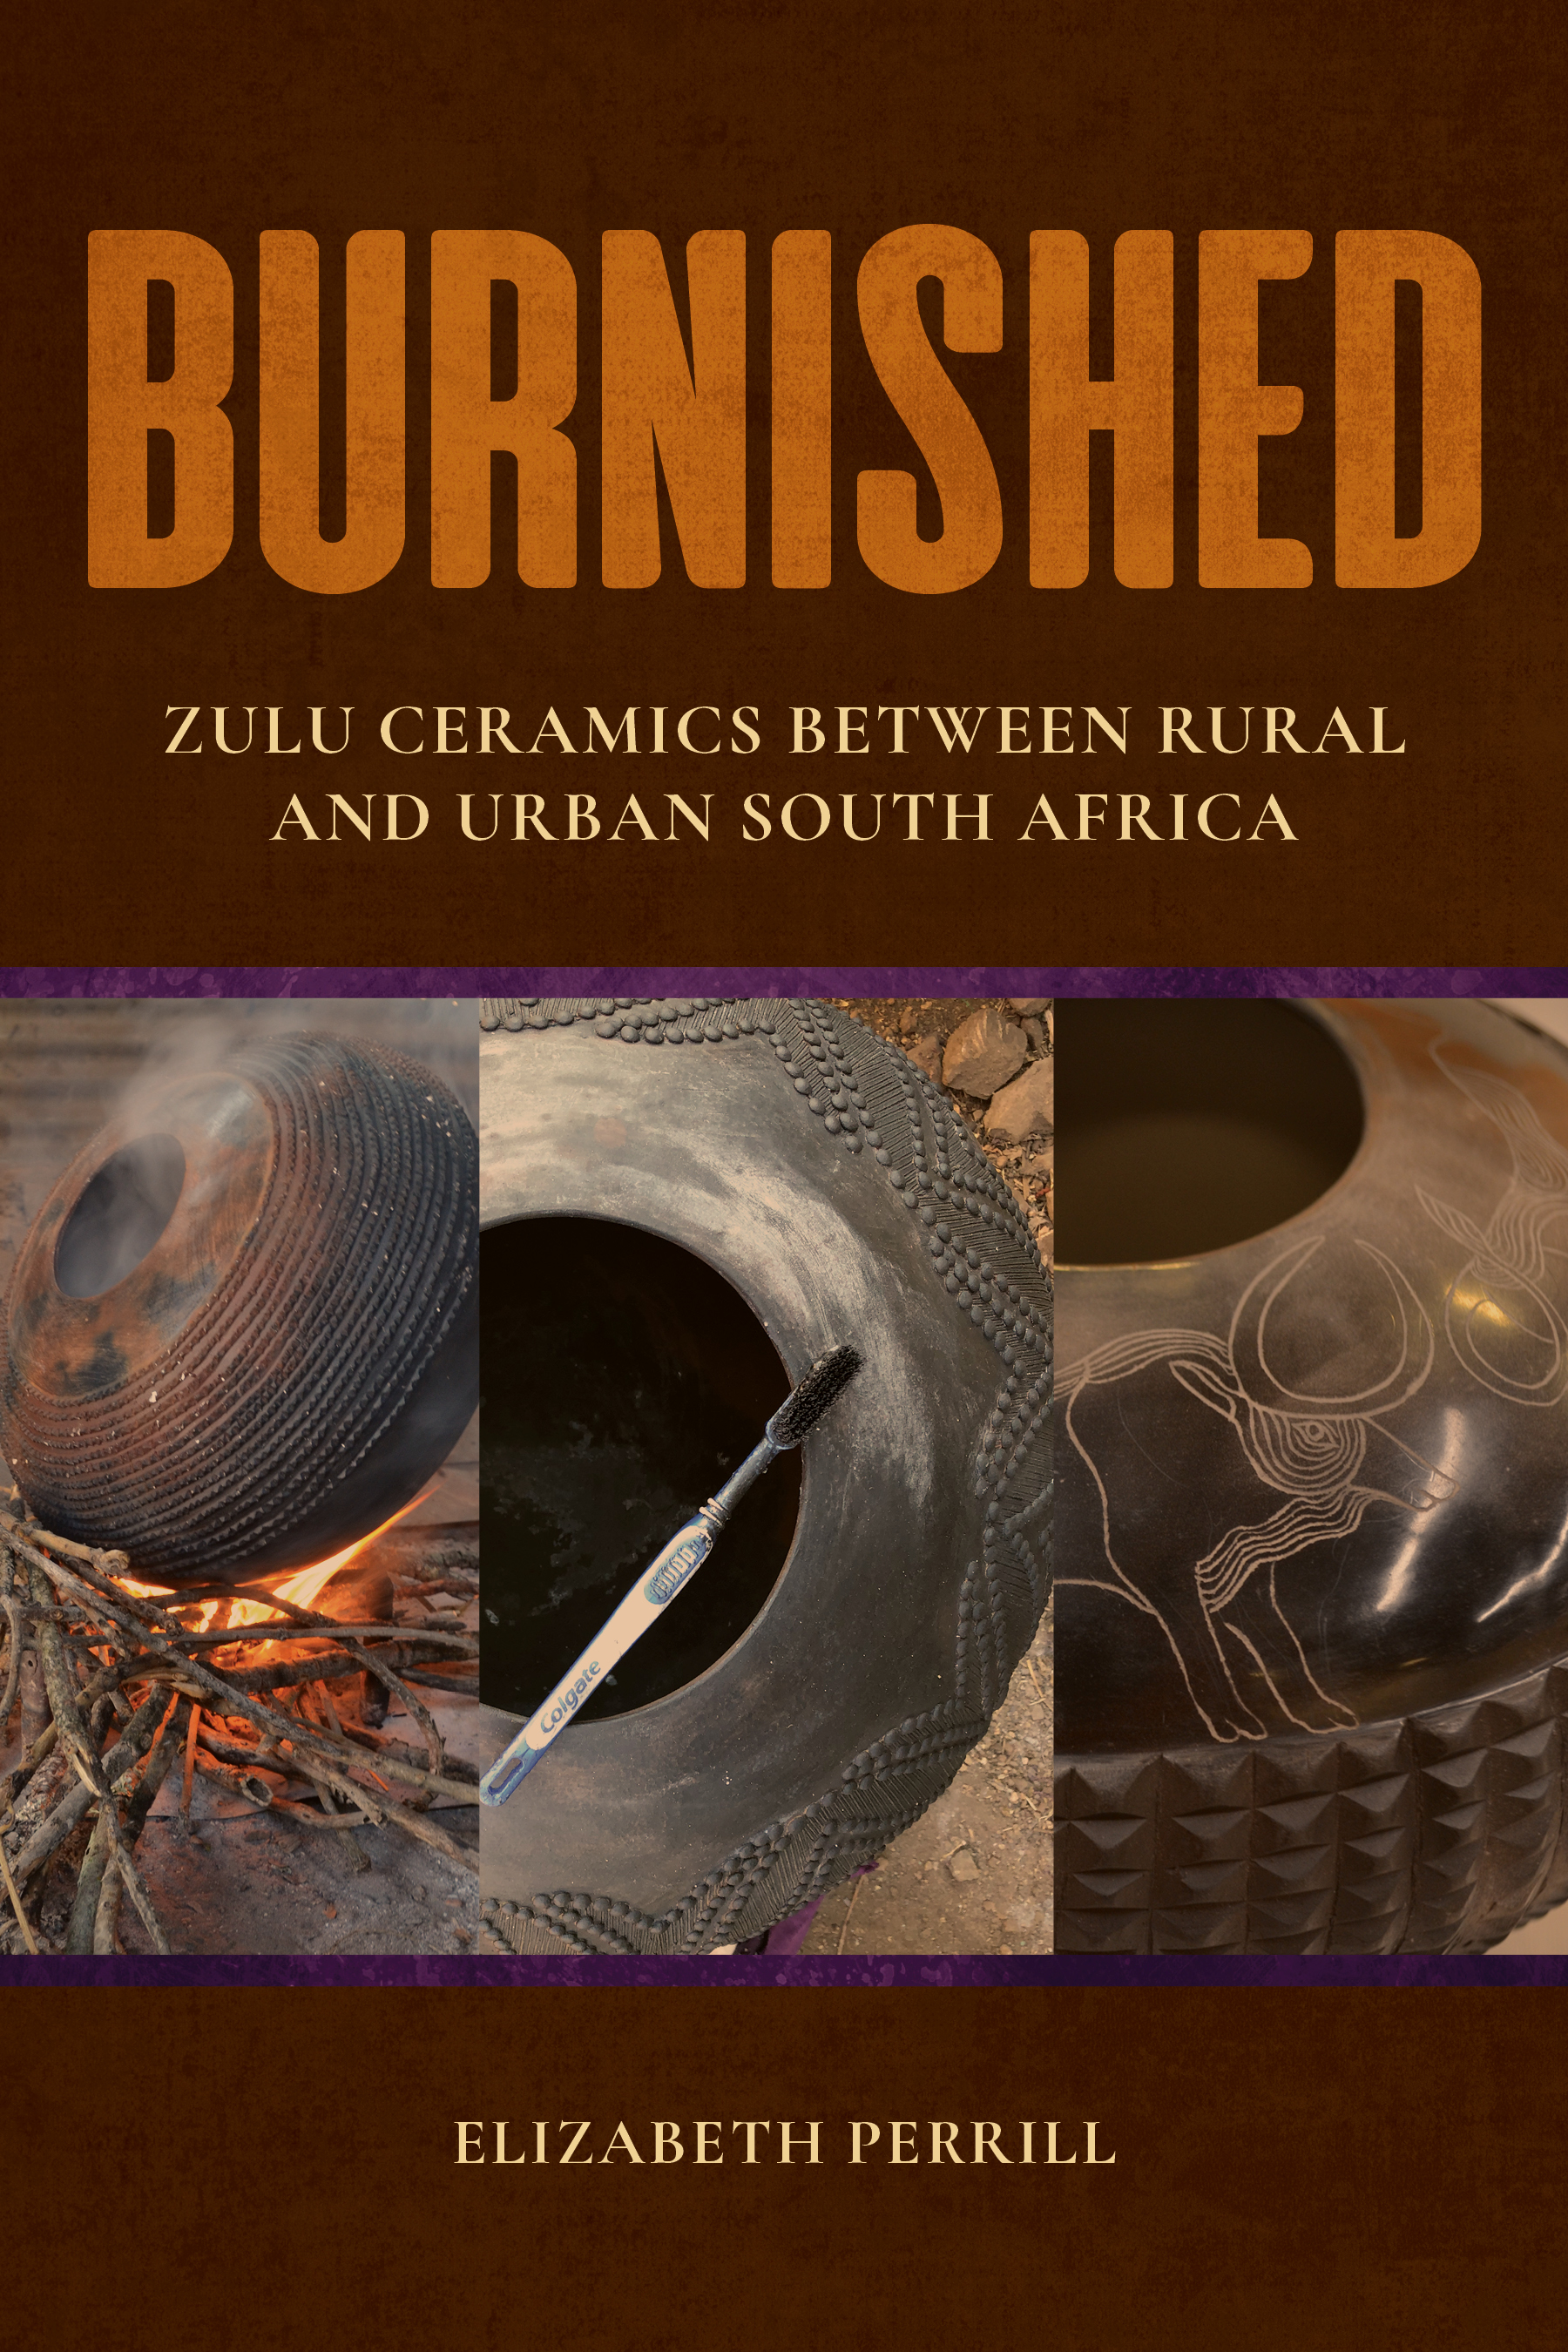 Cover art for "Burnished: Zulu Ceramics Between Rural and Urban South Africa" by Alumna Dr. Elizabeth Perrill